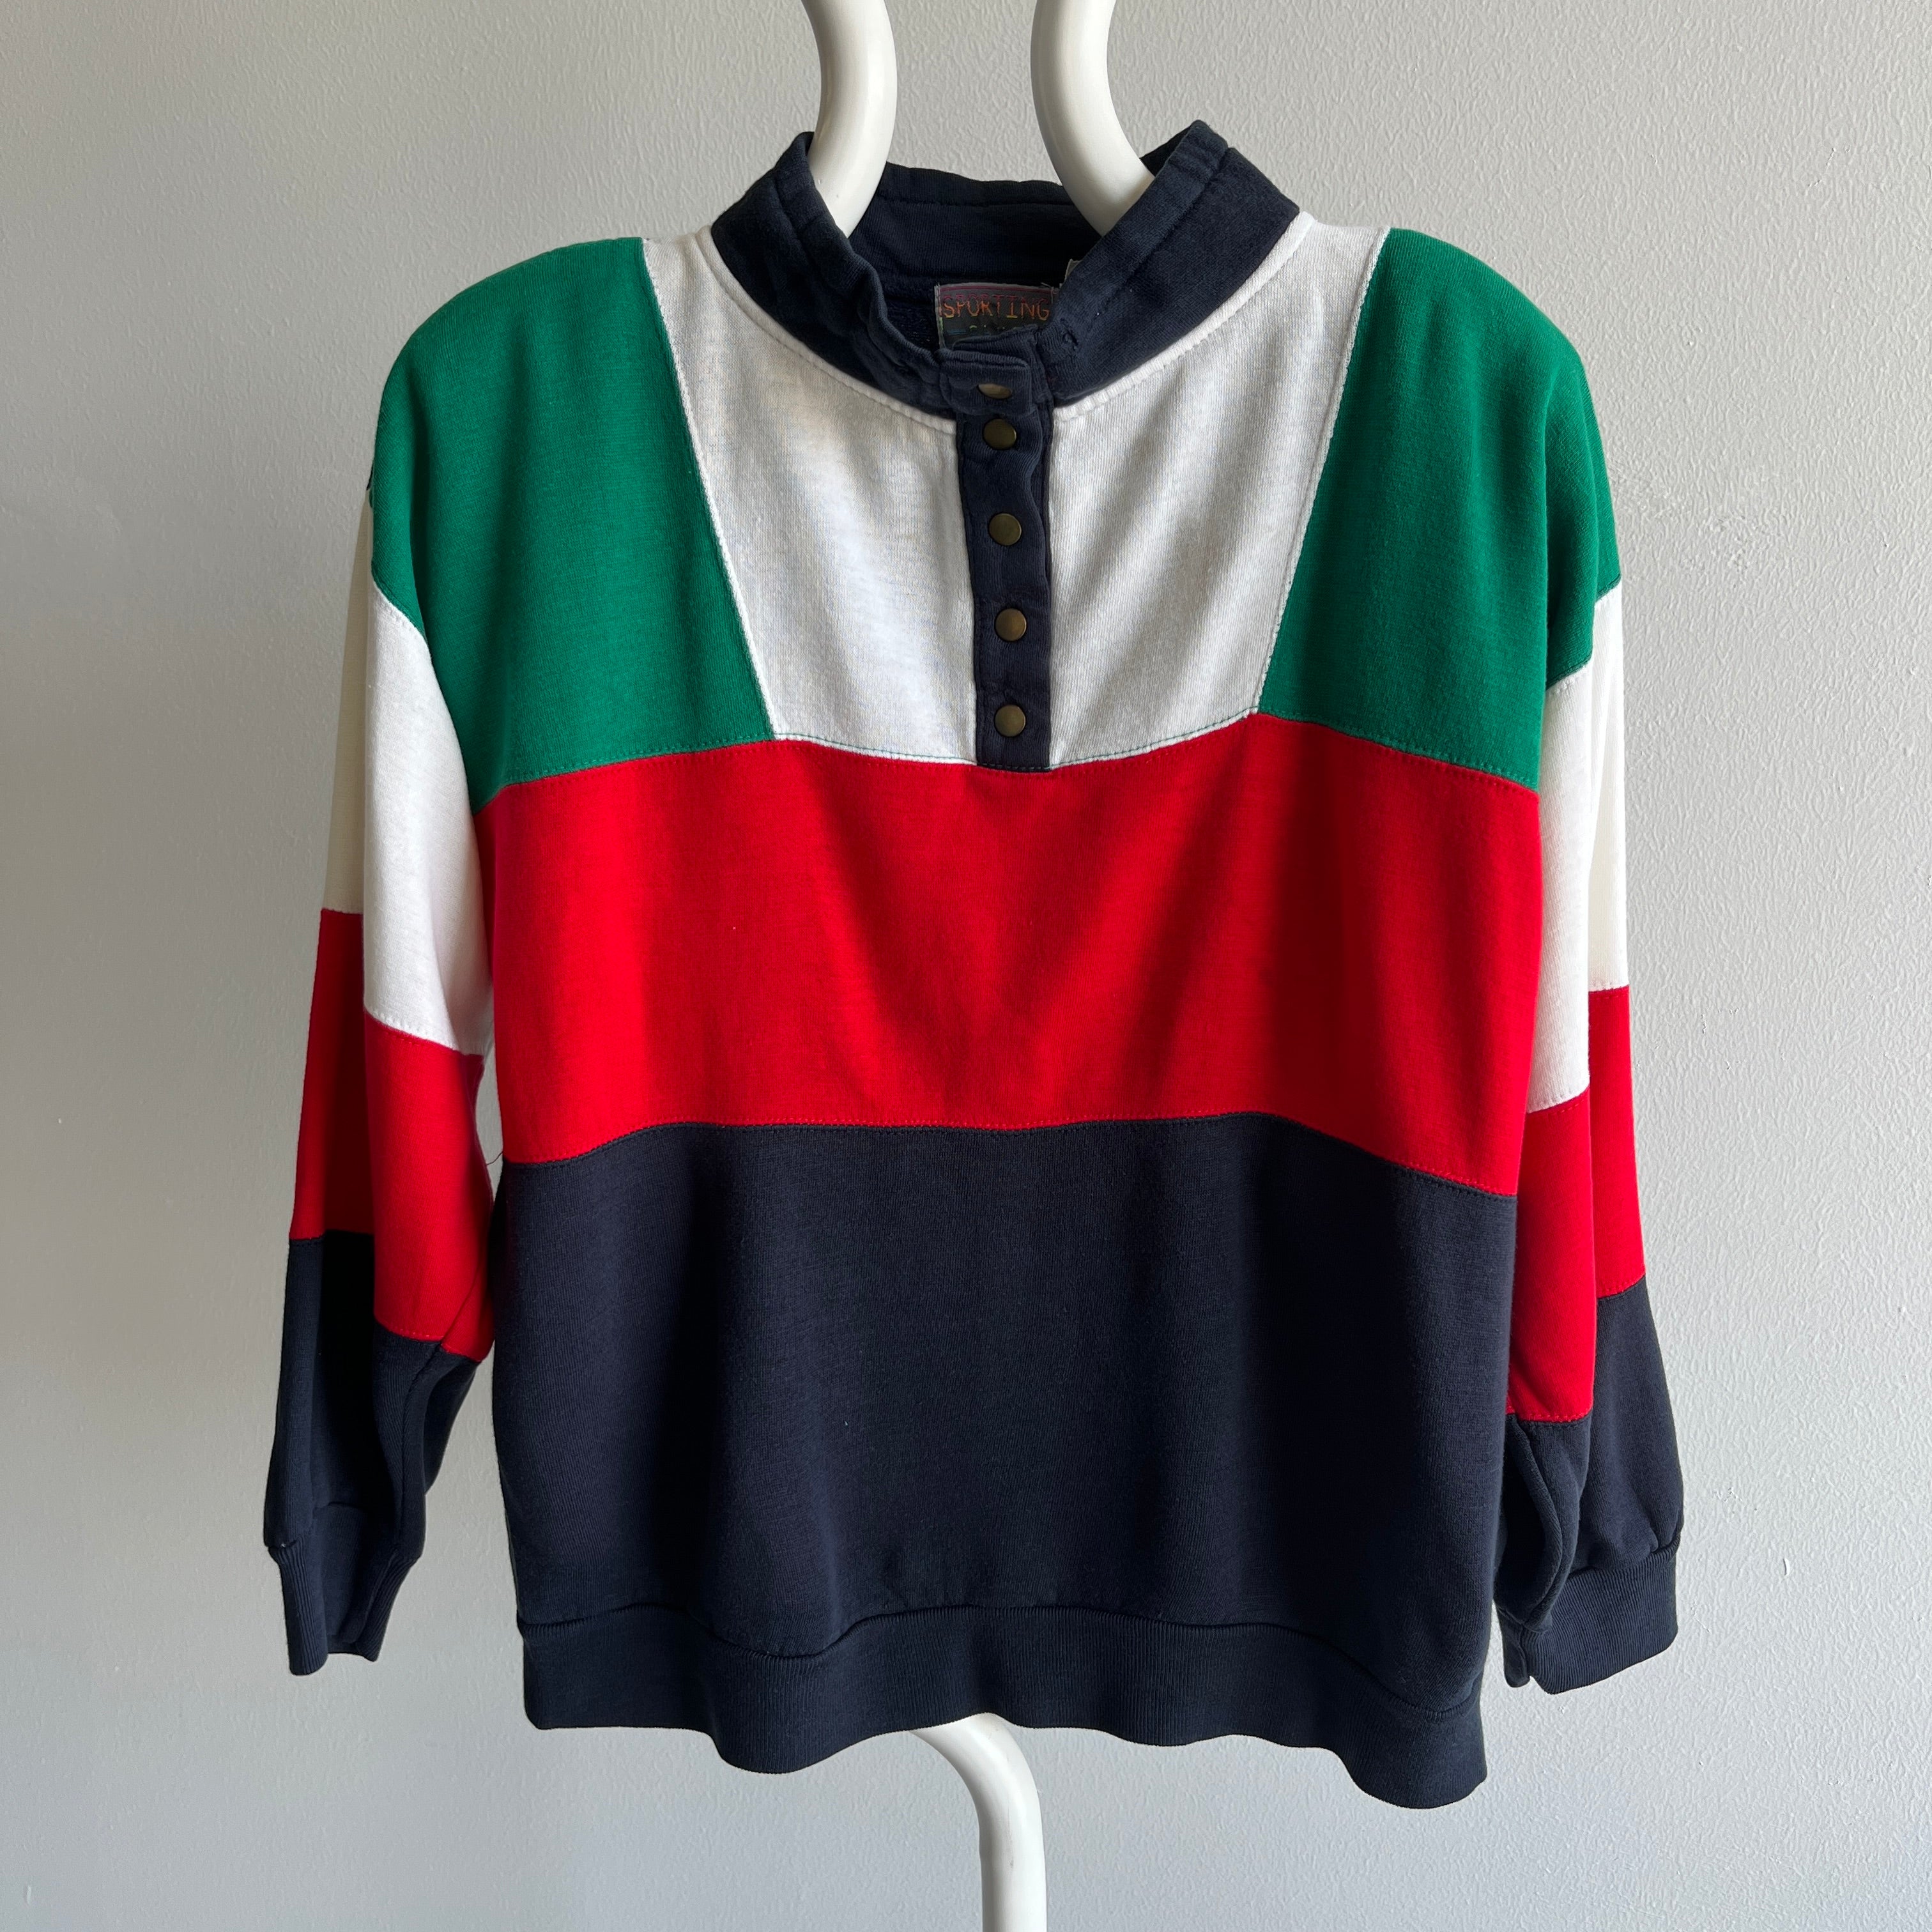 1980s Super DUper Soft and Slouchy Color Block Sweatshirt with Shoulder Pads and Stains